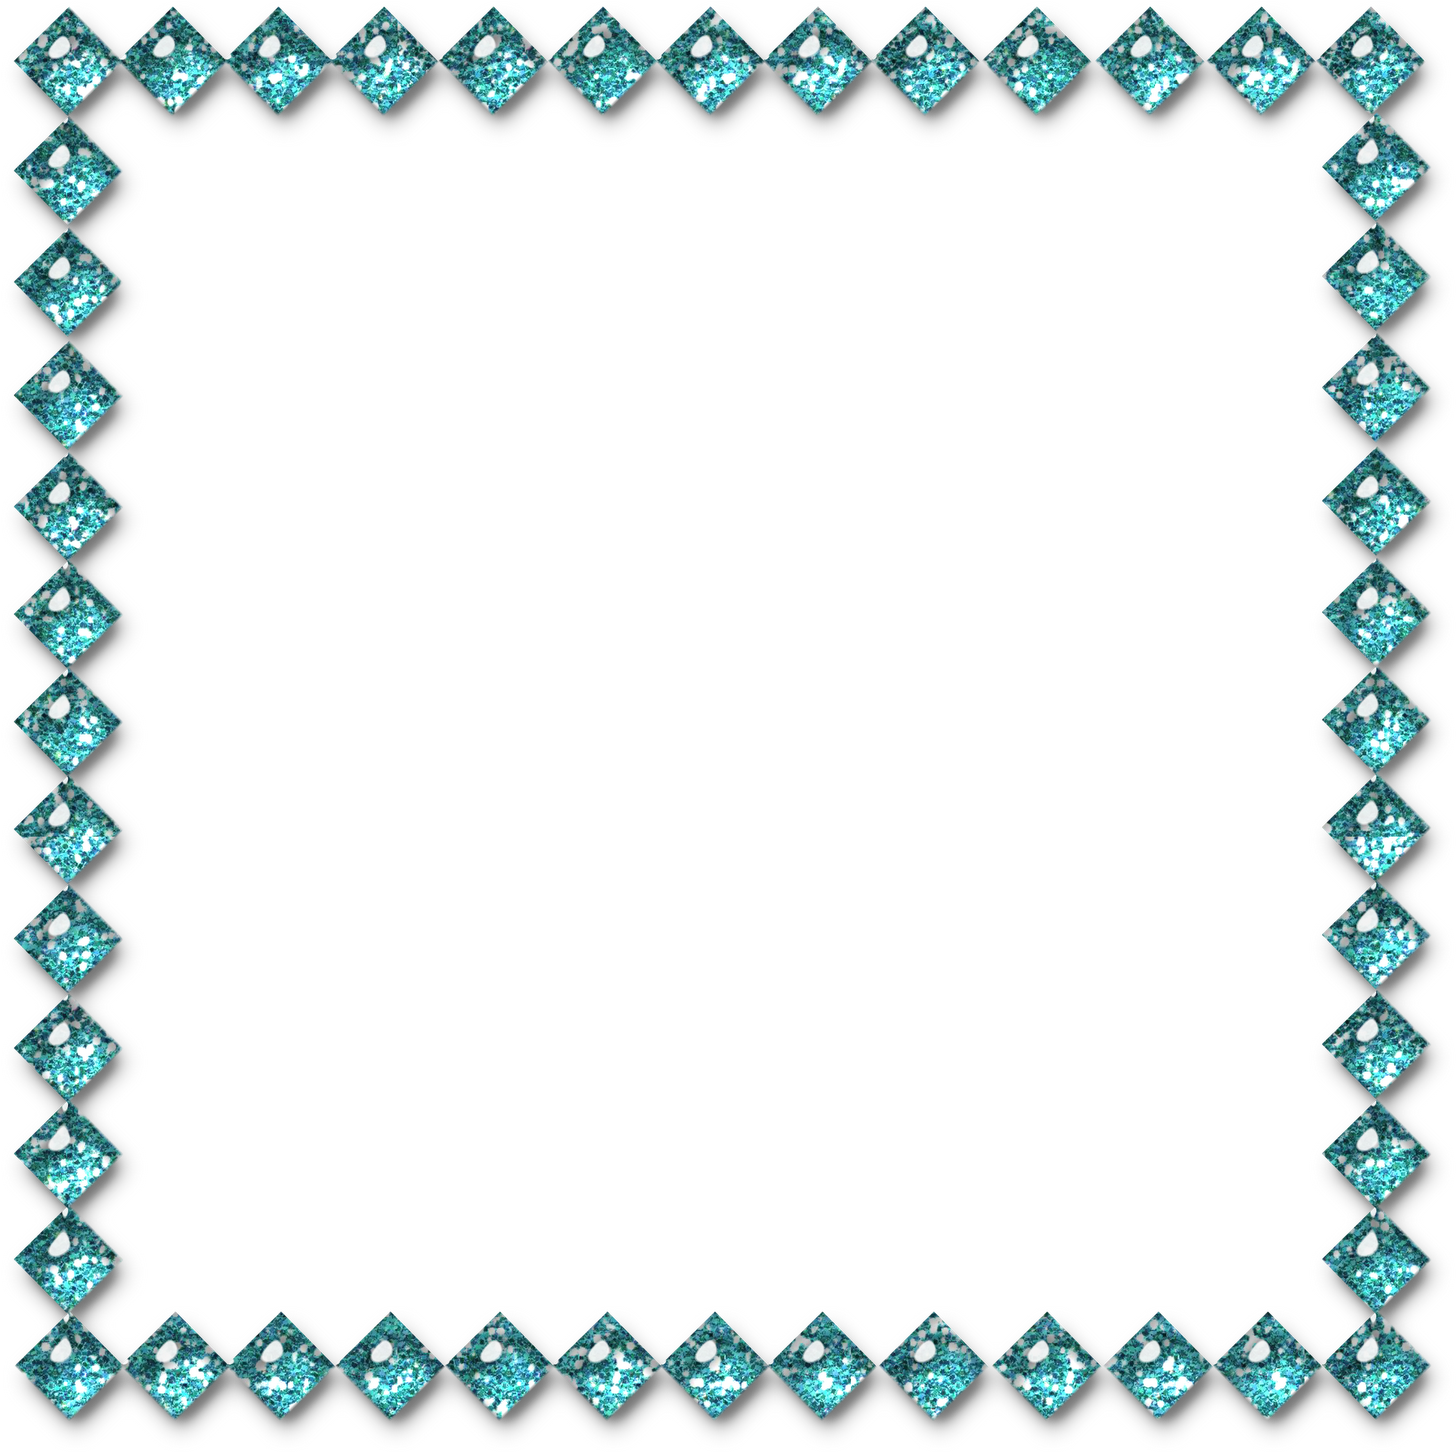 Templates Cliparts And More Several Blue Frames Christmas - Templates Cliparts And More Several Blue Frames Christmas (1600x1600)